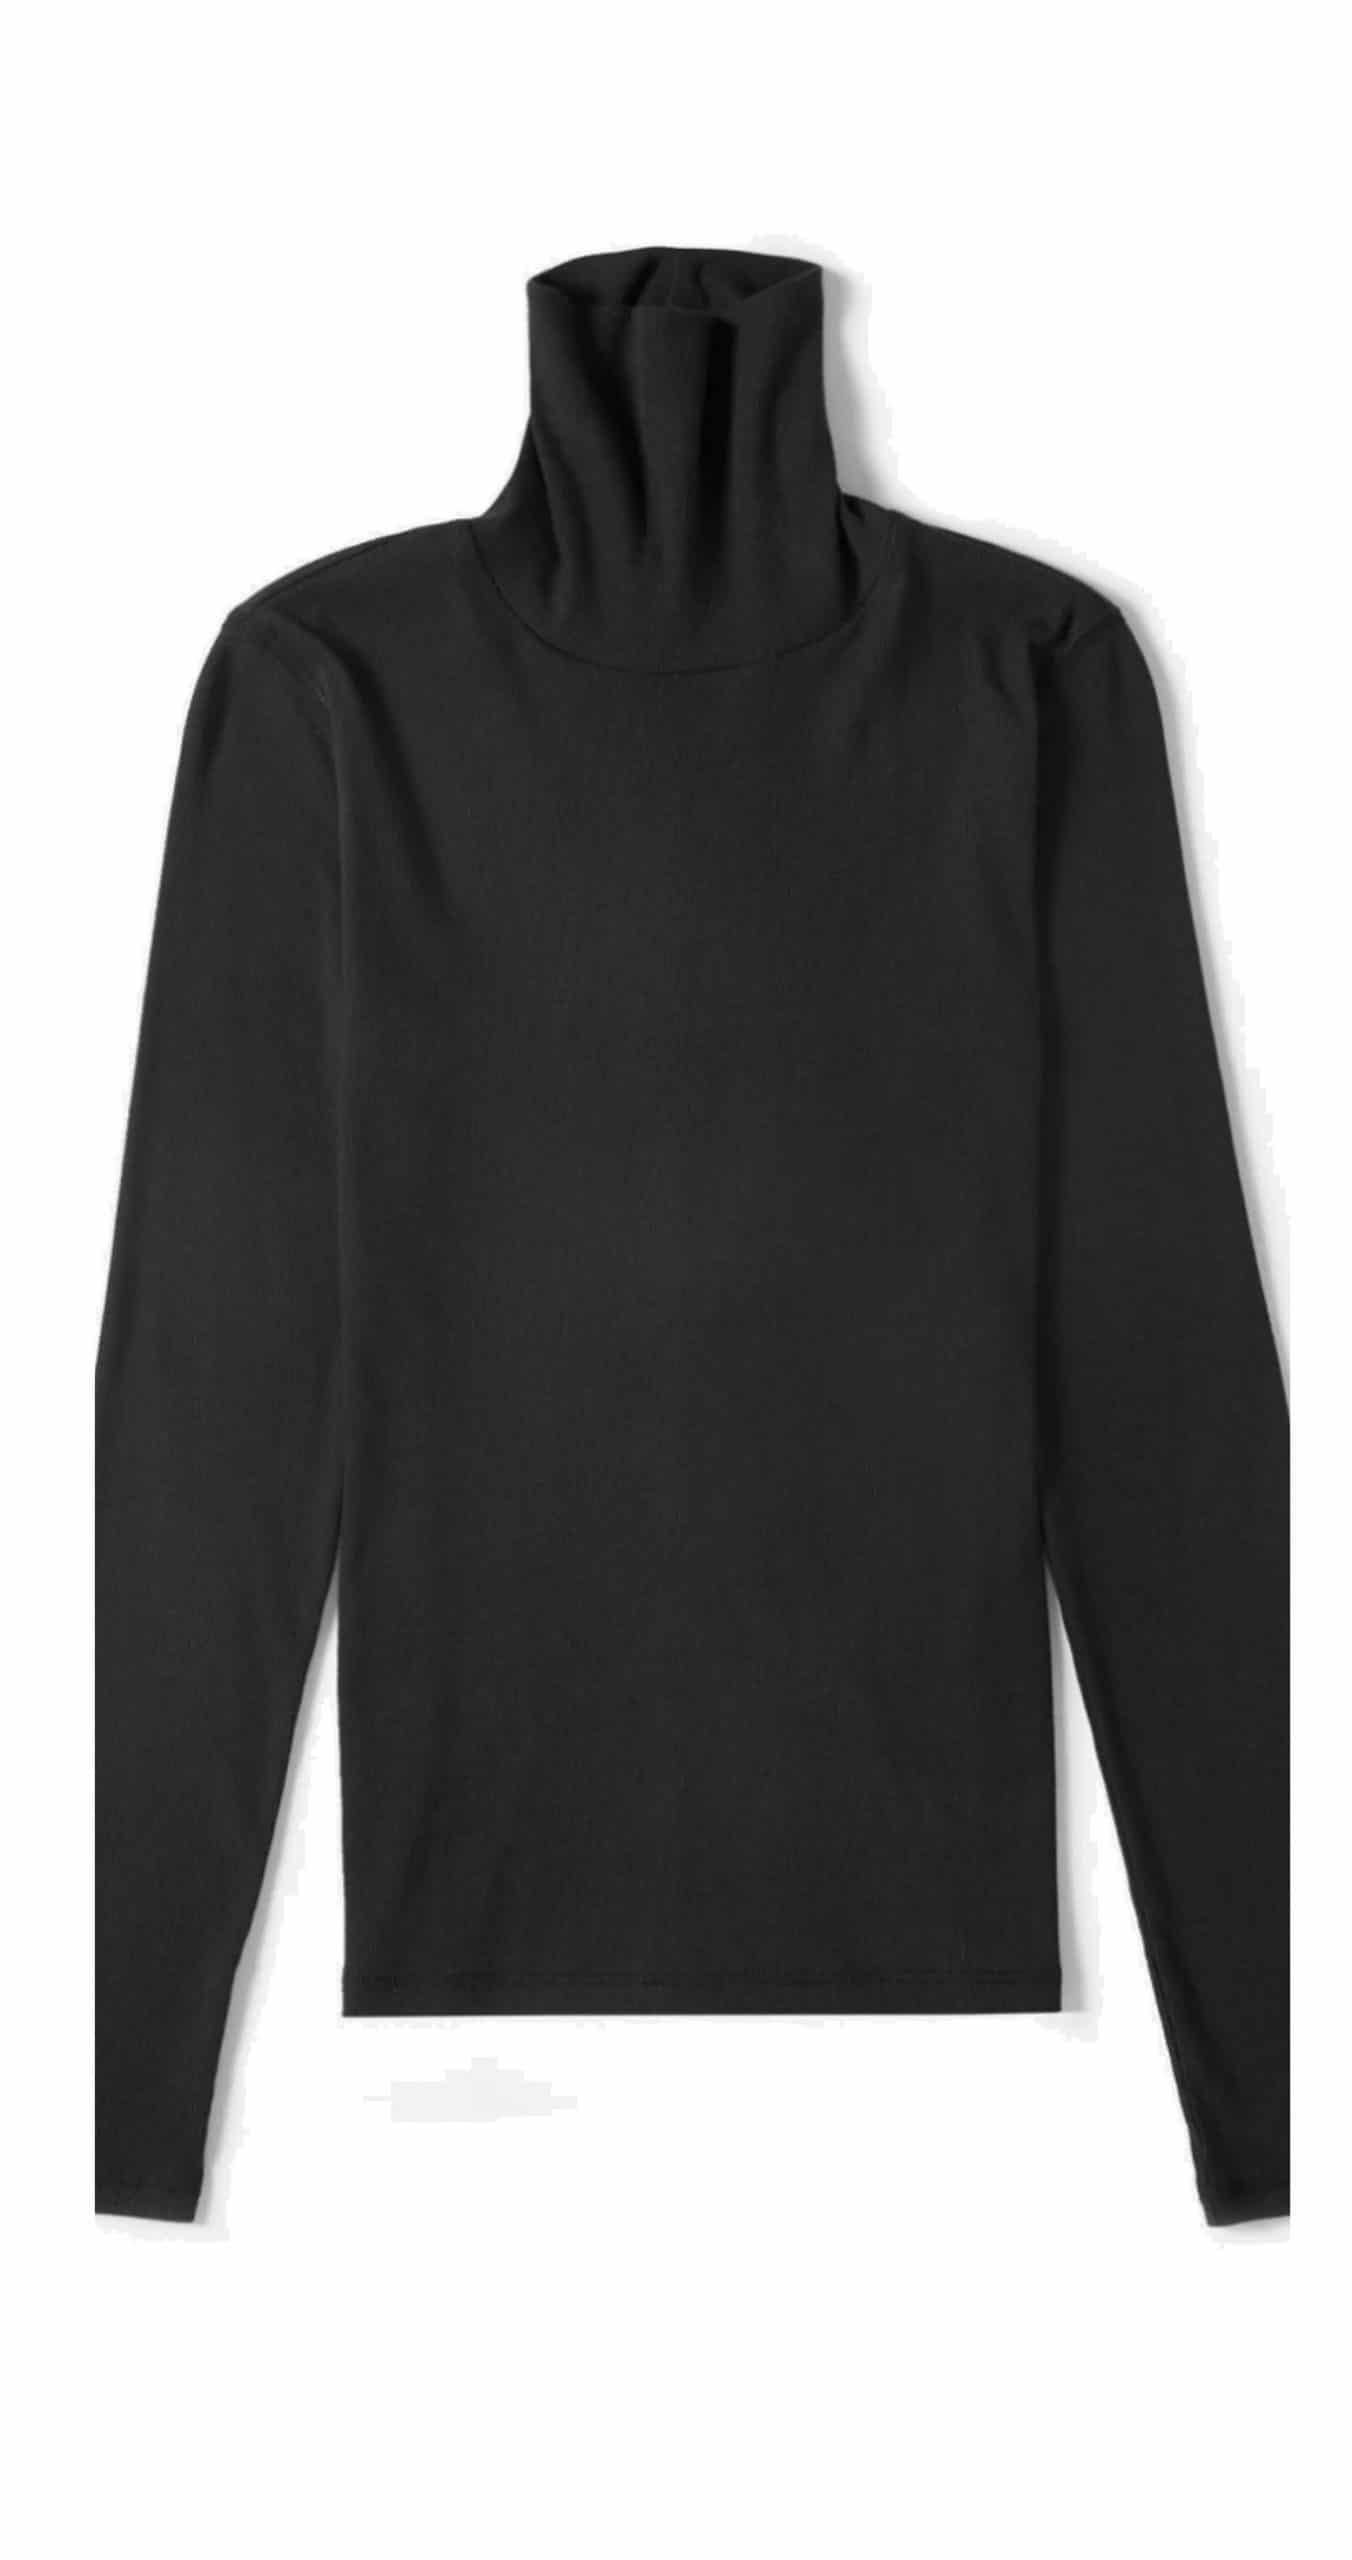 fall capsule wardrobe 2020 fitted black turtleneck